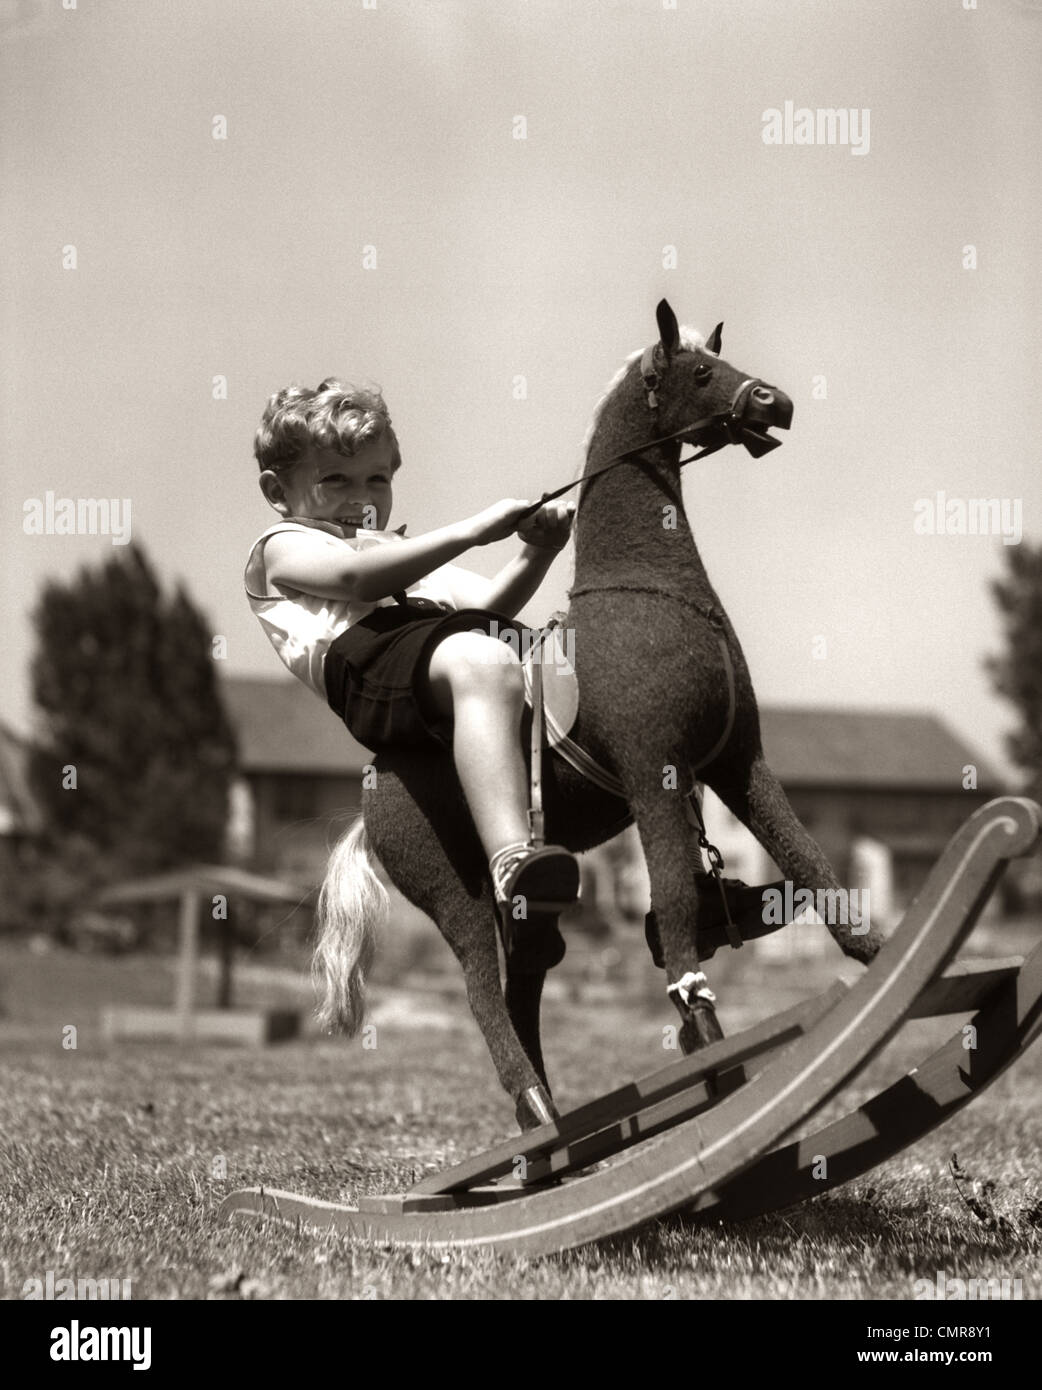 1930s LITTLE BOY OUTSIDE PLAYING RIDING ON TOY ROCKING HORSE Stock Photo